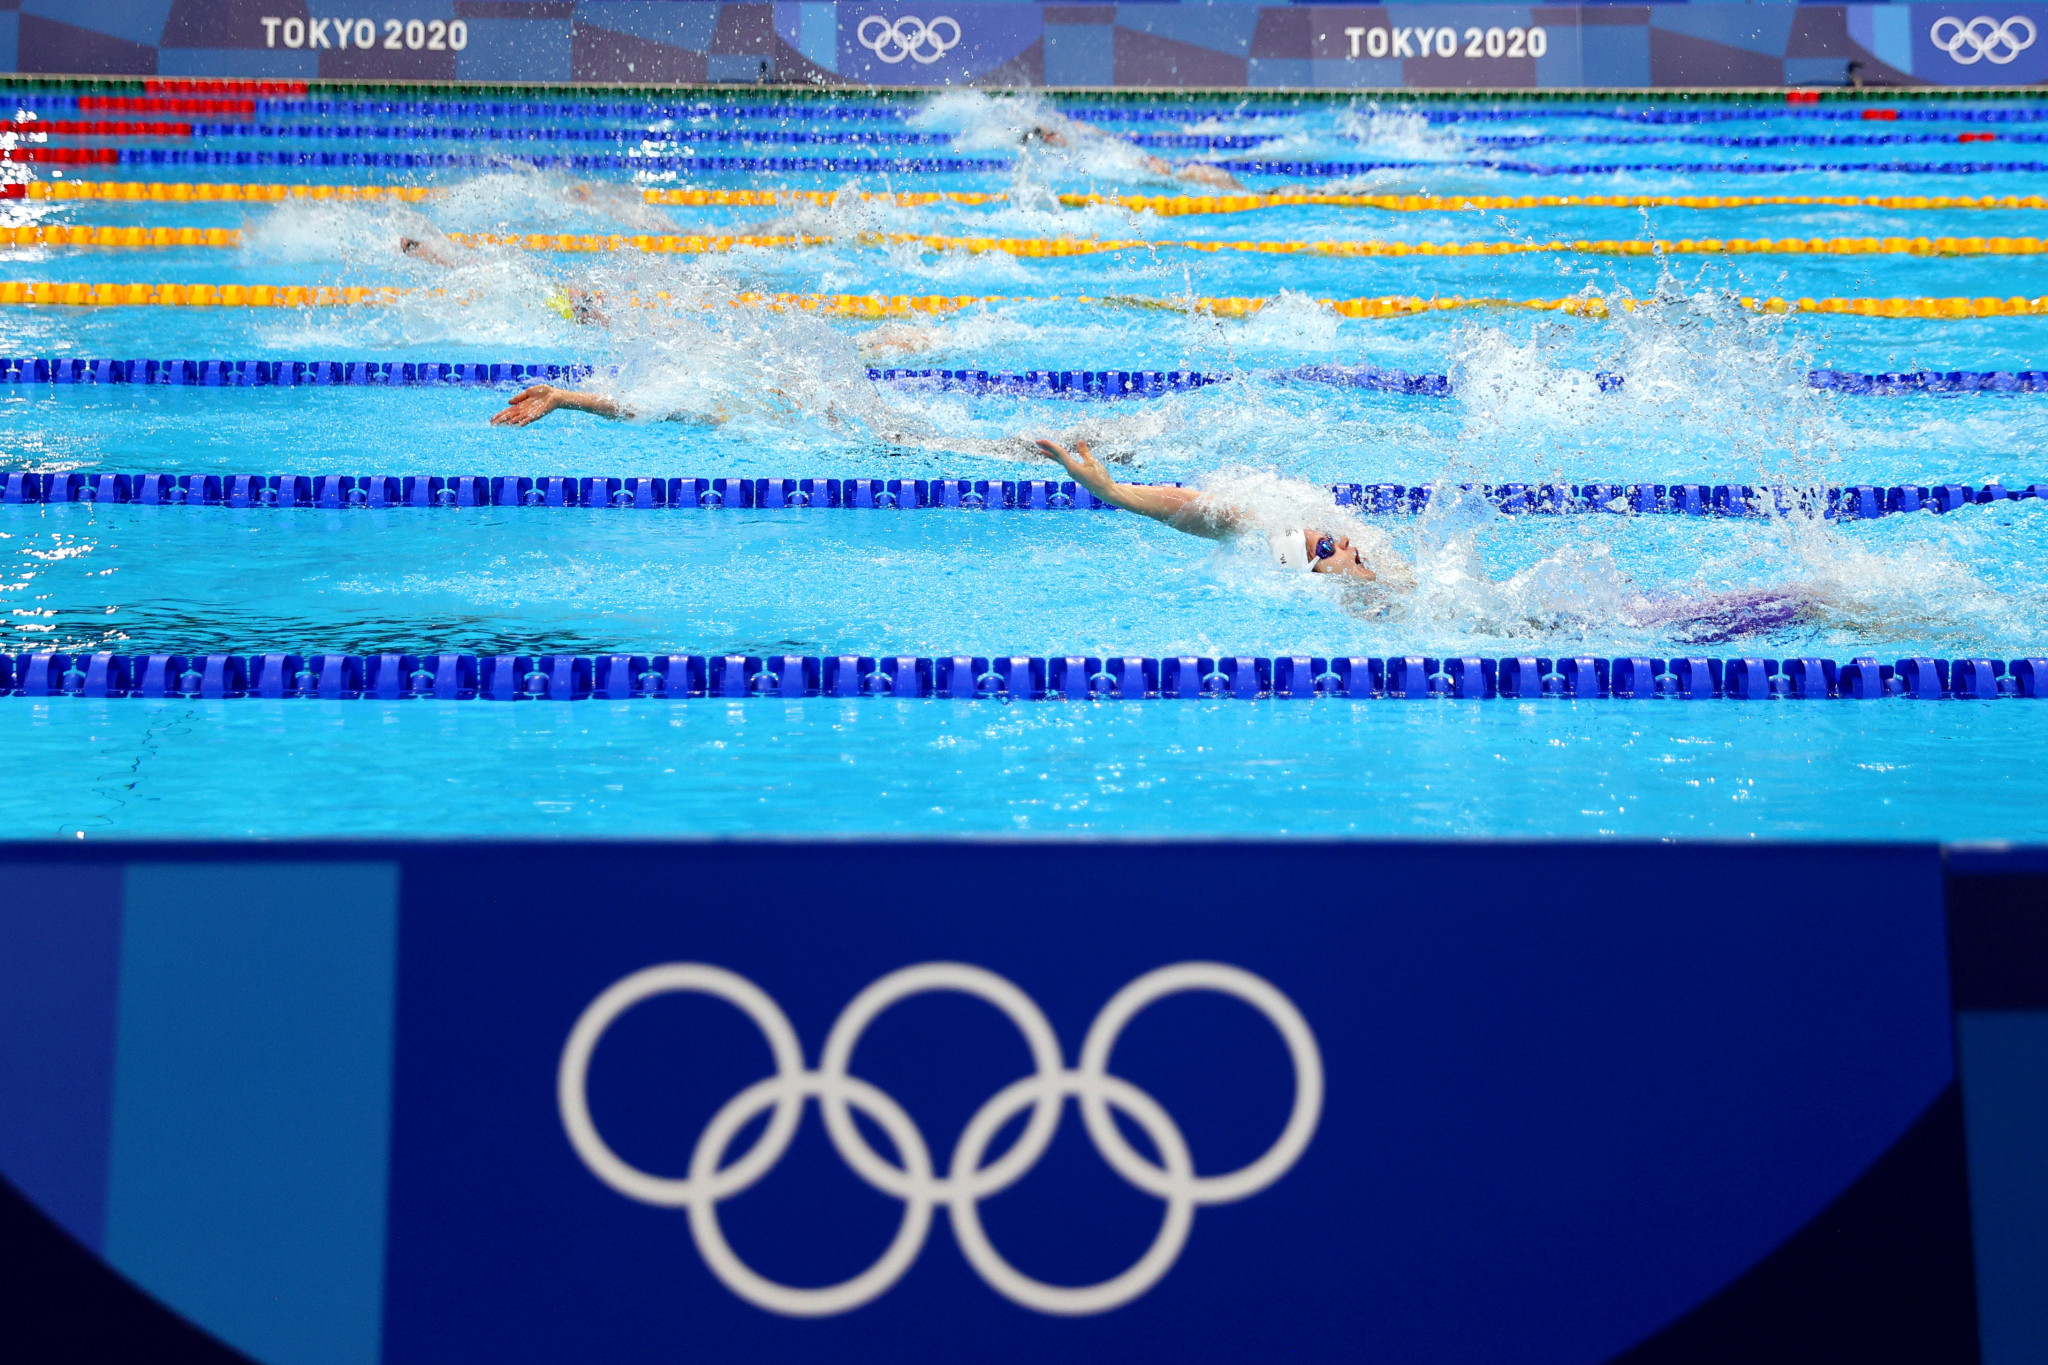 Olympic qualification times initially published by the IOC for several Paris 2024 swimming events were quicker than at Tokyo 2020 ©Getty Images